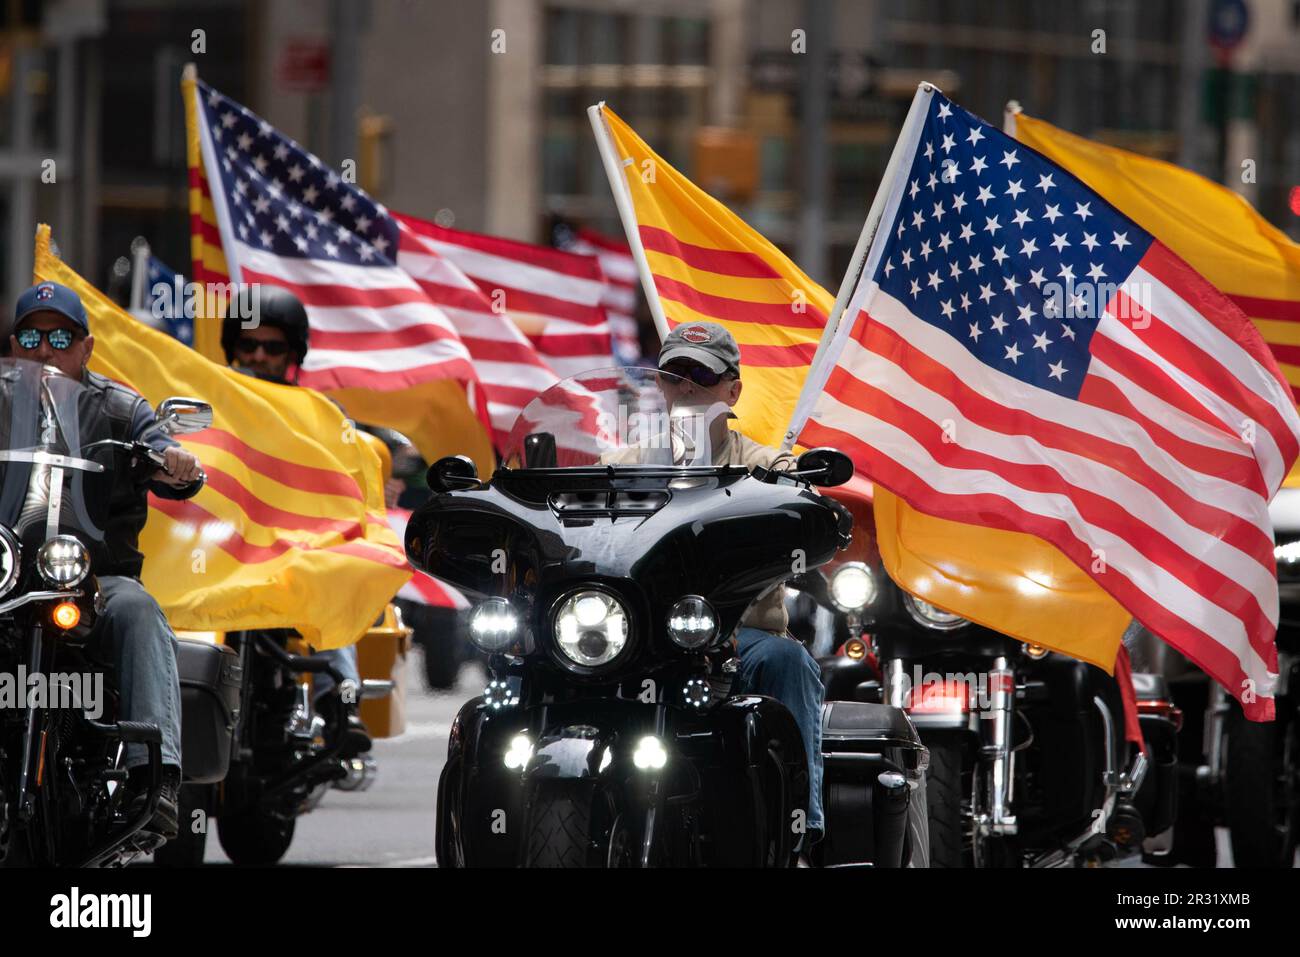 May 21, 2023, %G: (NEW) Motorcycle group with American and Vietnamese flags at the second annual AAPI Parade on Sixth Avenue (Avenue of the Americas). May 21, 2023. New York, USA The Asian American and Pacific Islander (AAPI) Cultural and Heritage Parade comes as New Yorkers celebrate Asian American Pacific Islander Heritage Month in May, as well as New York CityÃ¢â‚¬â„¢s being home to the second-largest Asian American and Pacific Islander population in the United States. AAPI Heritage Month pays tribute to the generations of Asian American and Pacific Islanders who have enriched New YorkÃ¢â‚¬ Stock Photo